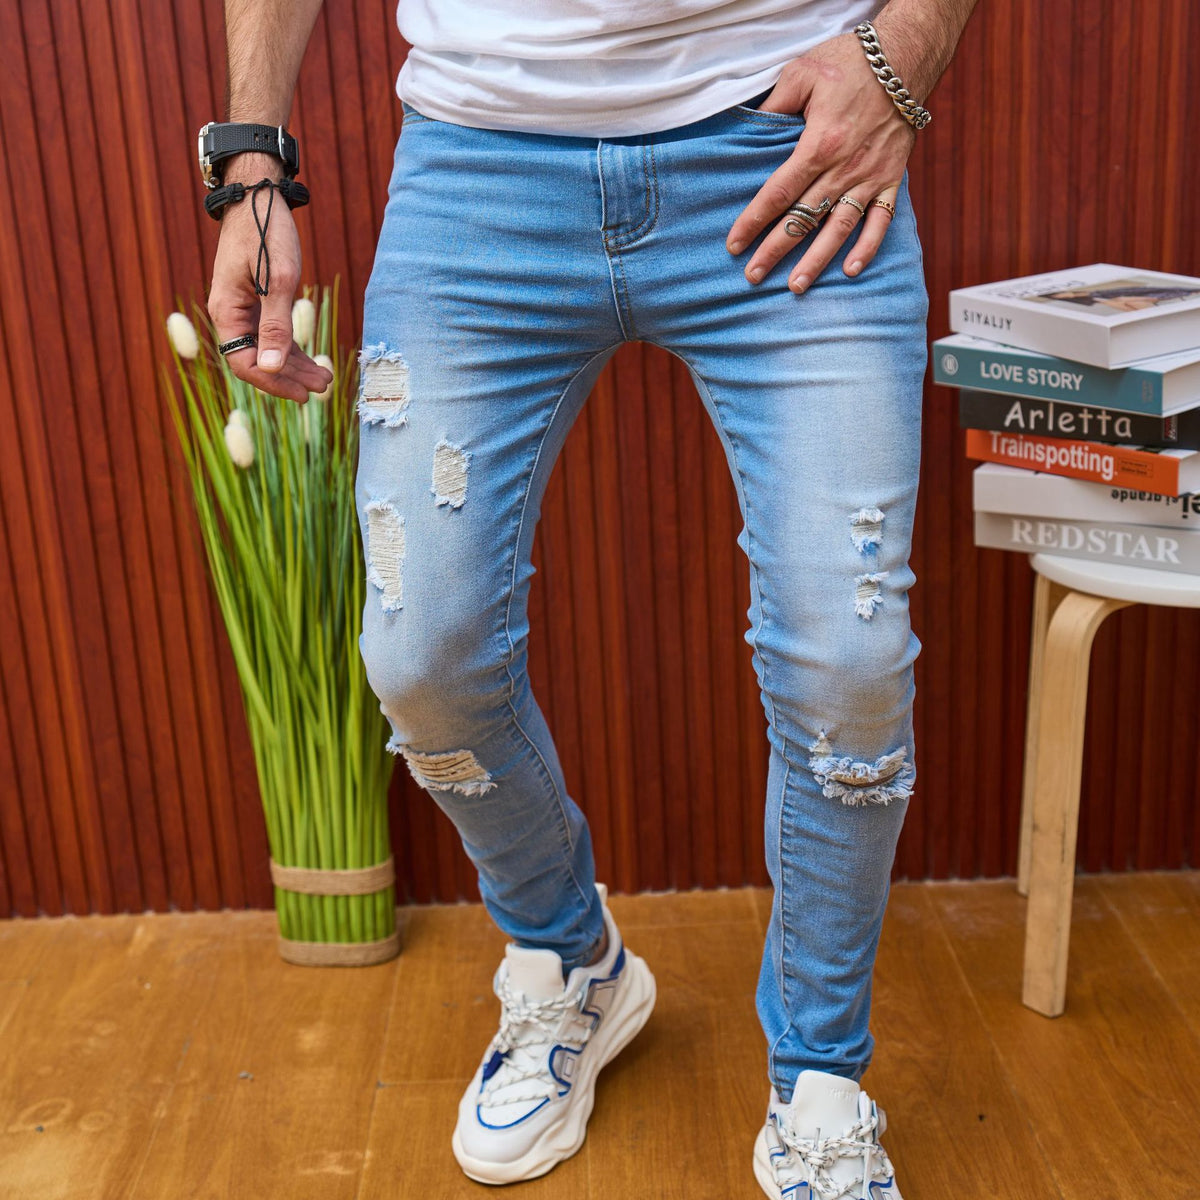 Summer Ripped Men's Casual Slim Fit Stretch Jeans